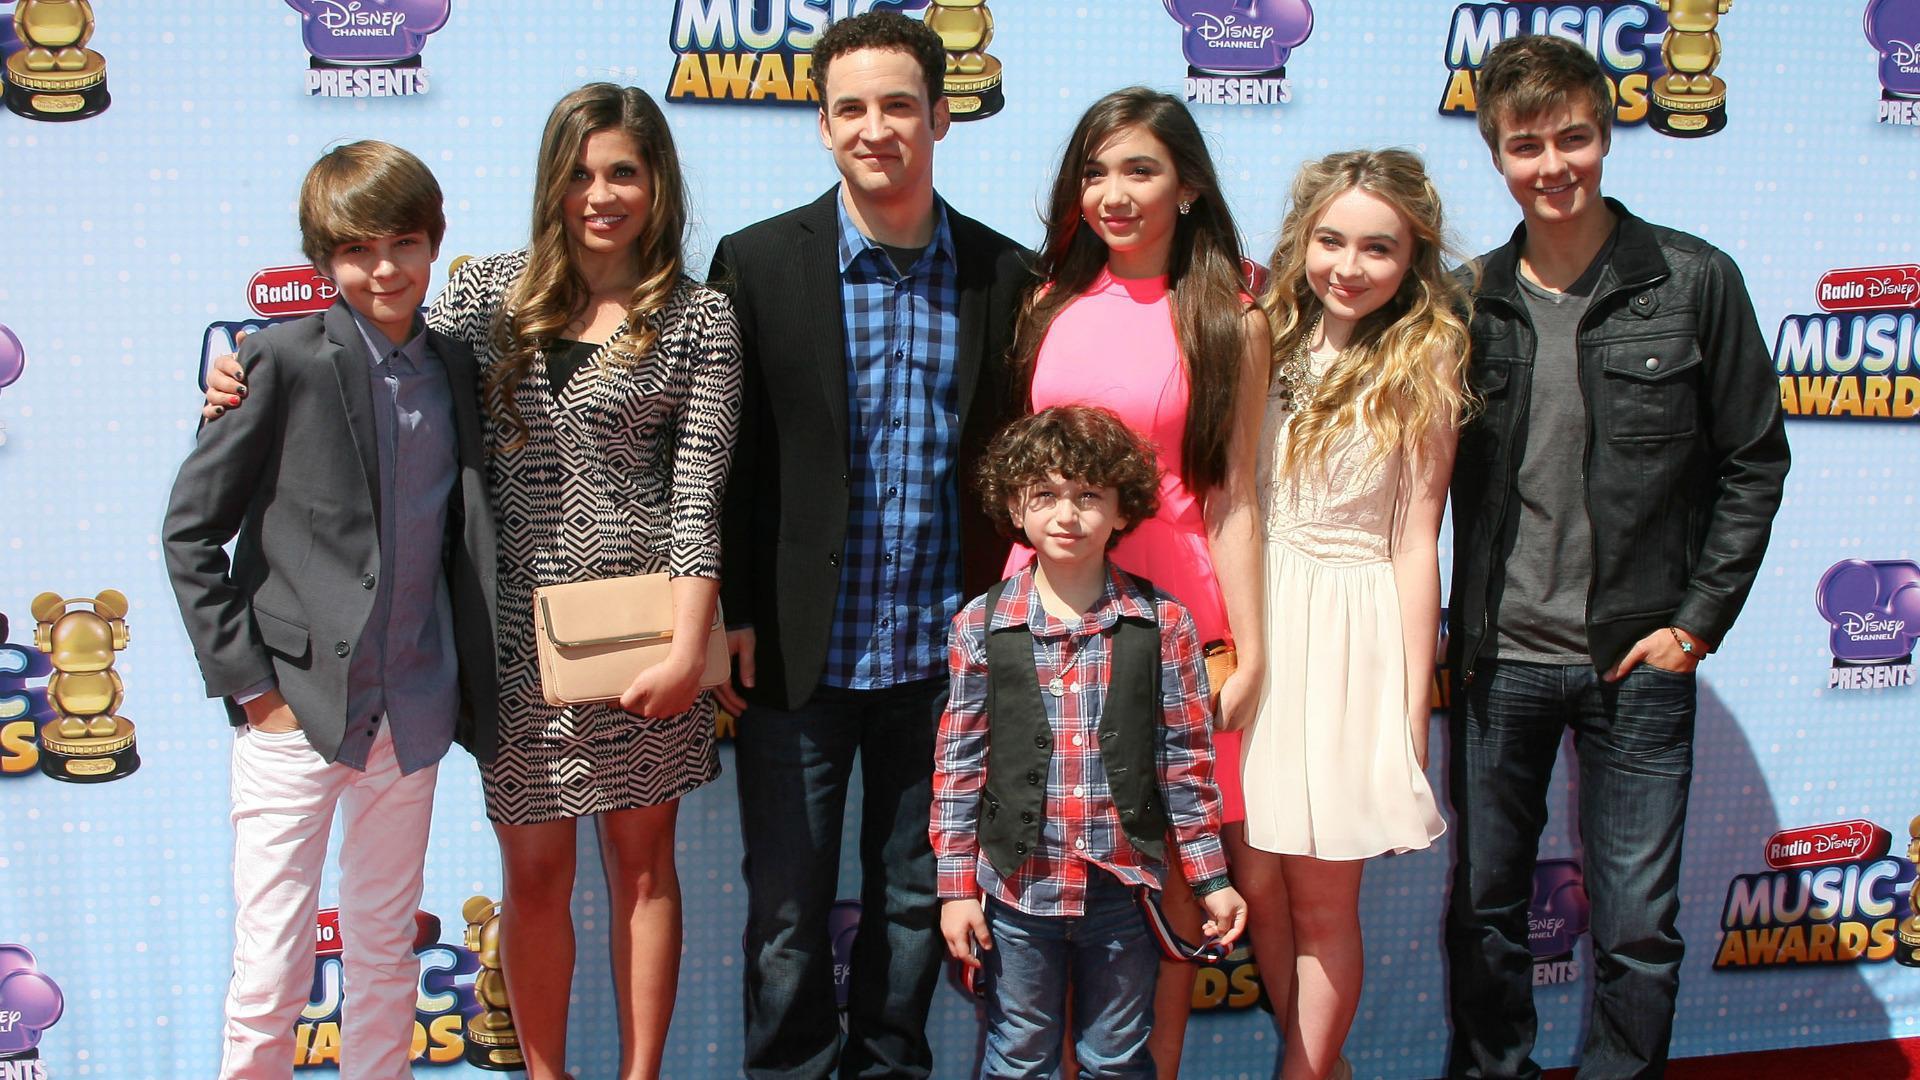 VIDEO: Girl Meets World opening credits are too cute